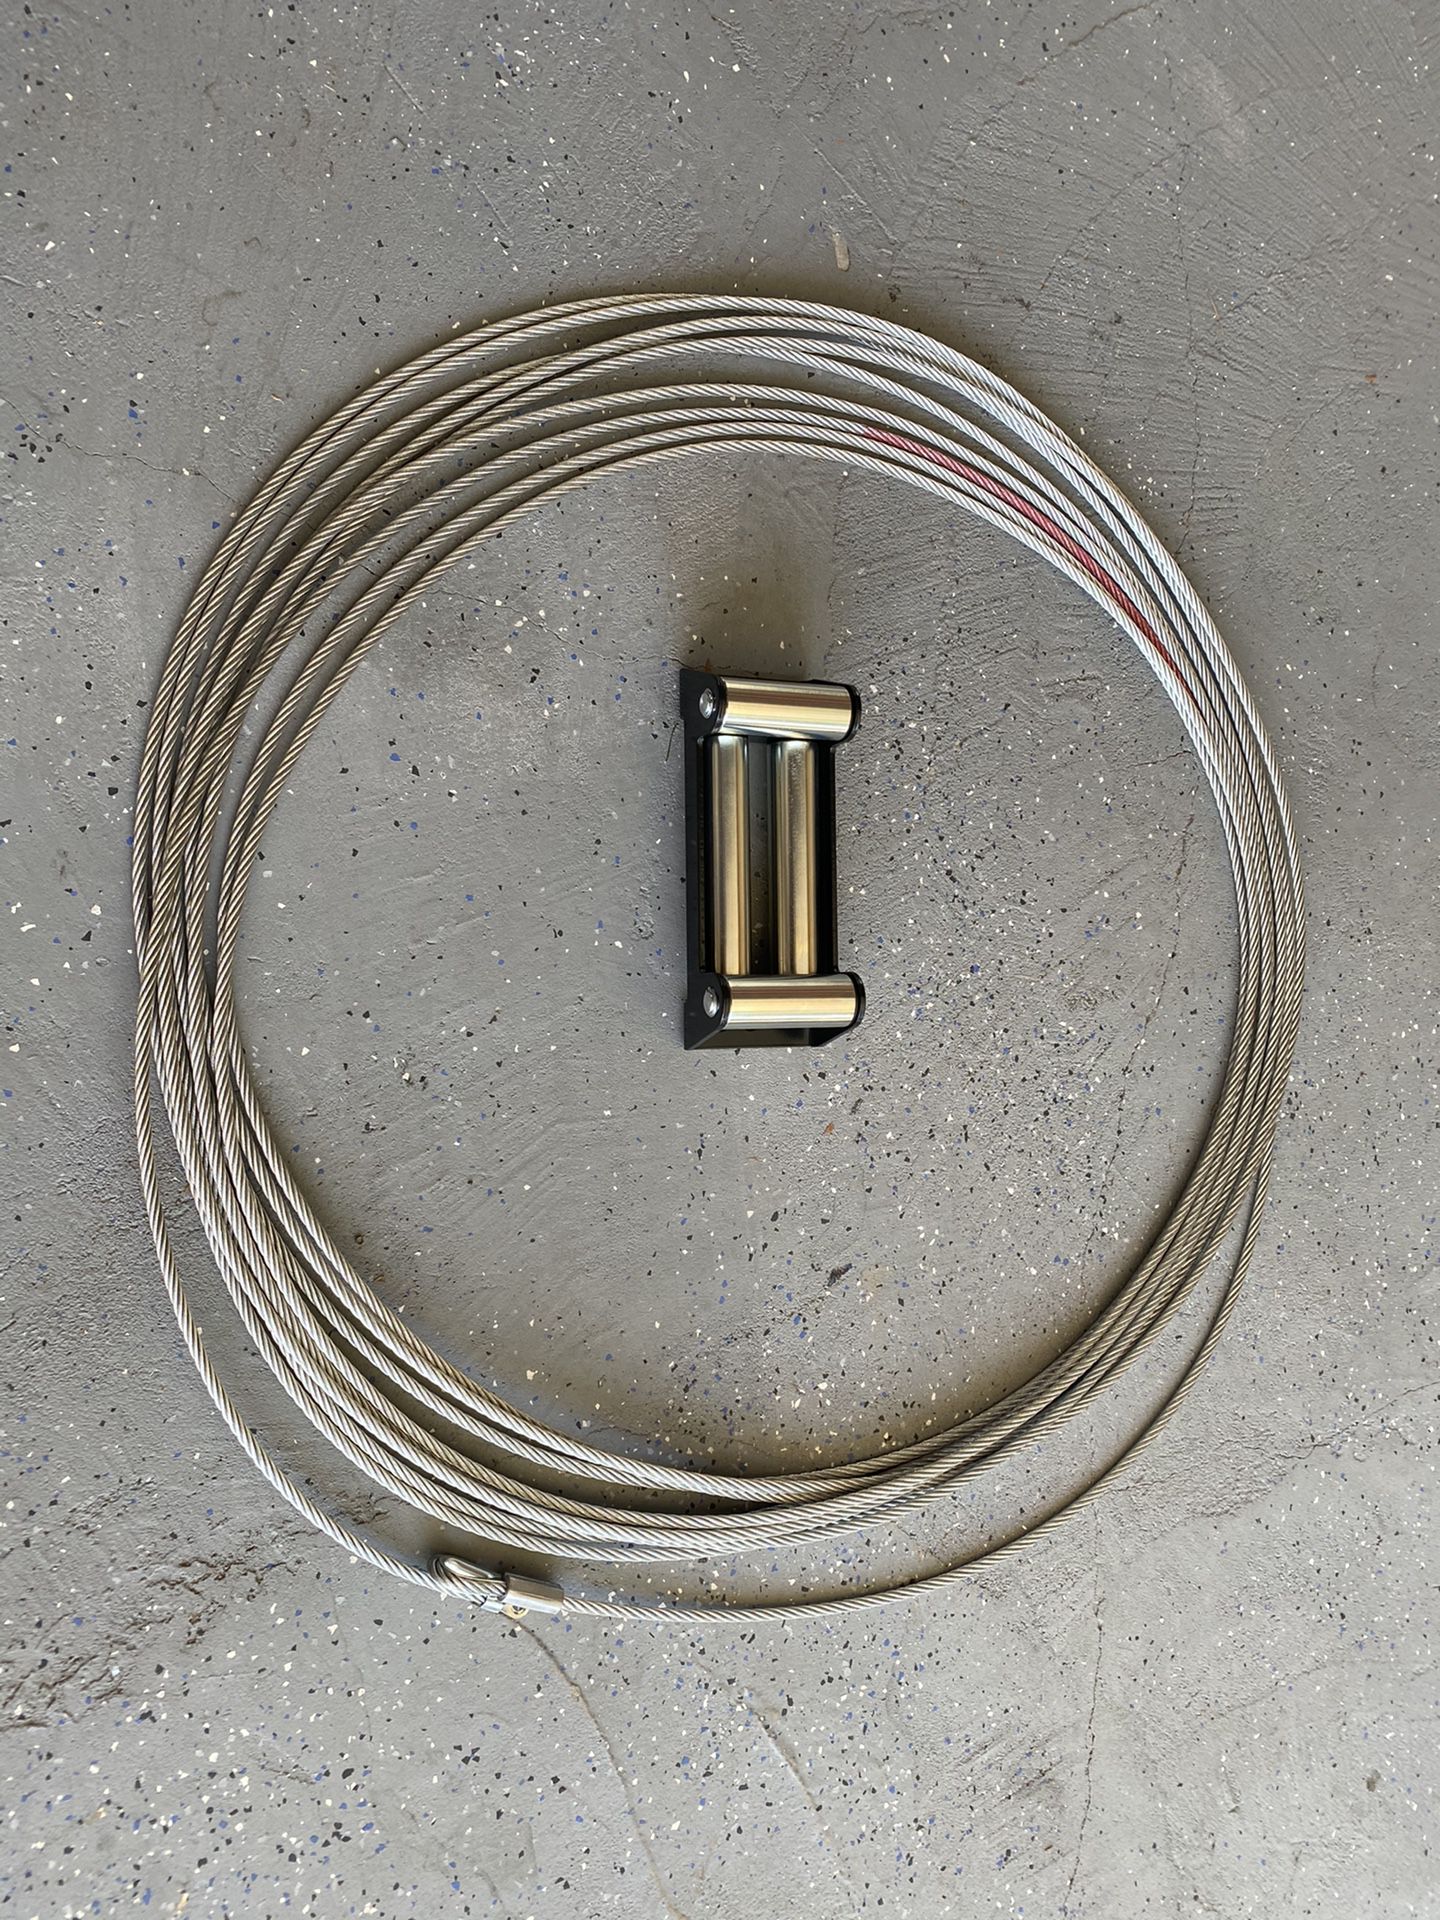 Warn 10000lb. wire rope and fair lead. Brand New!